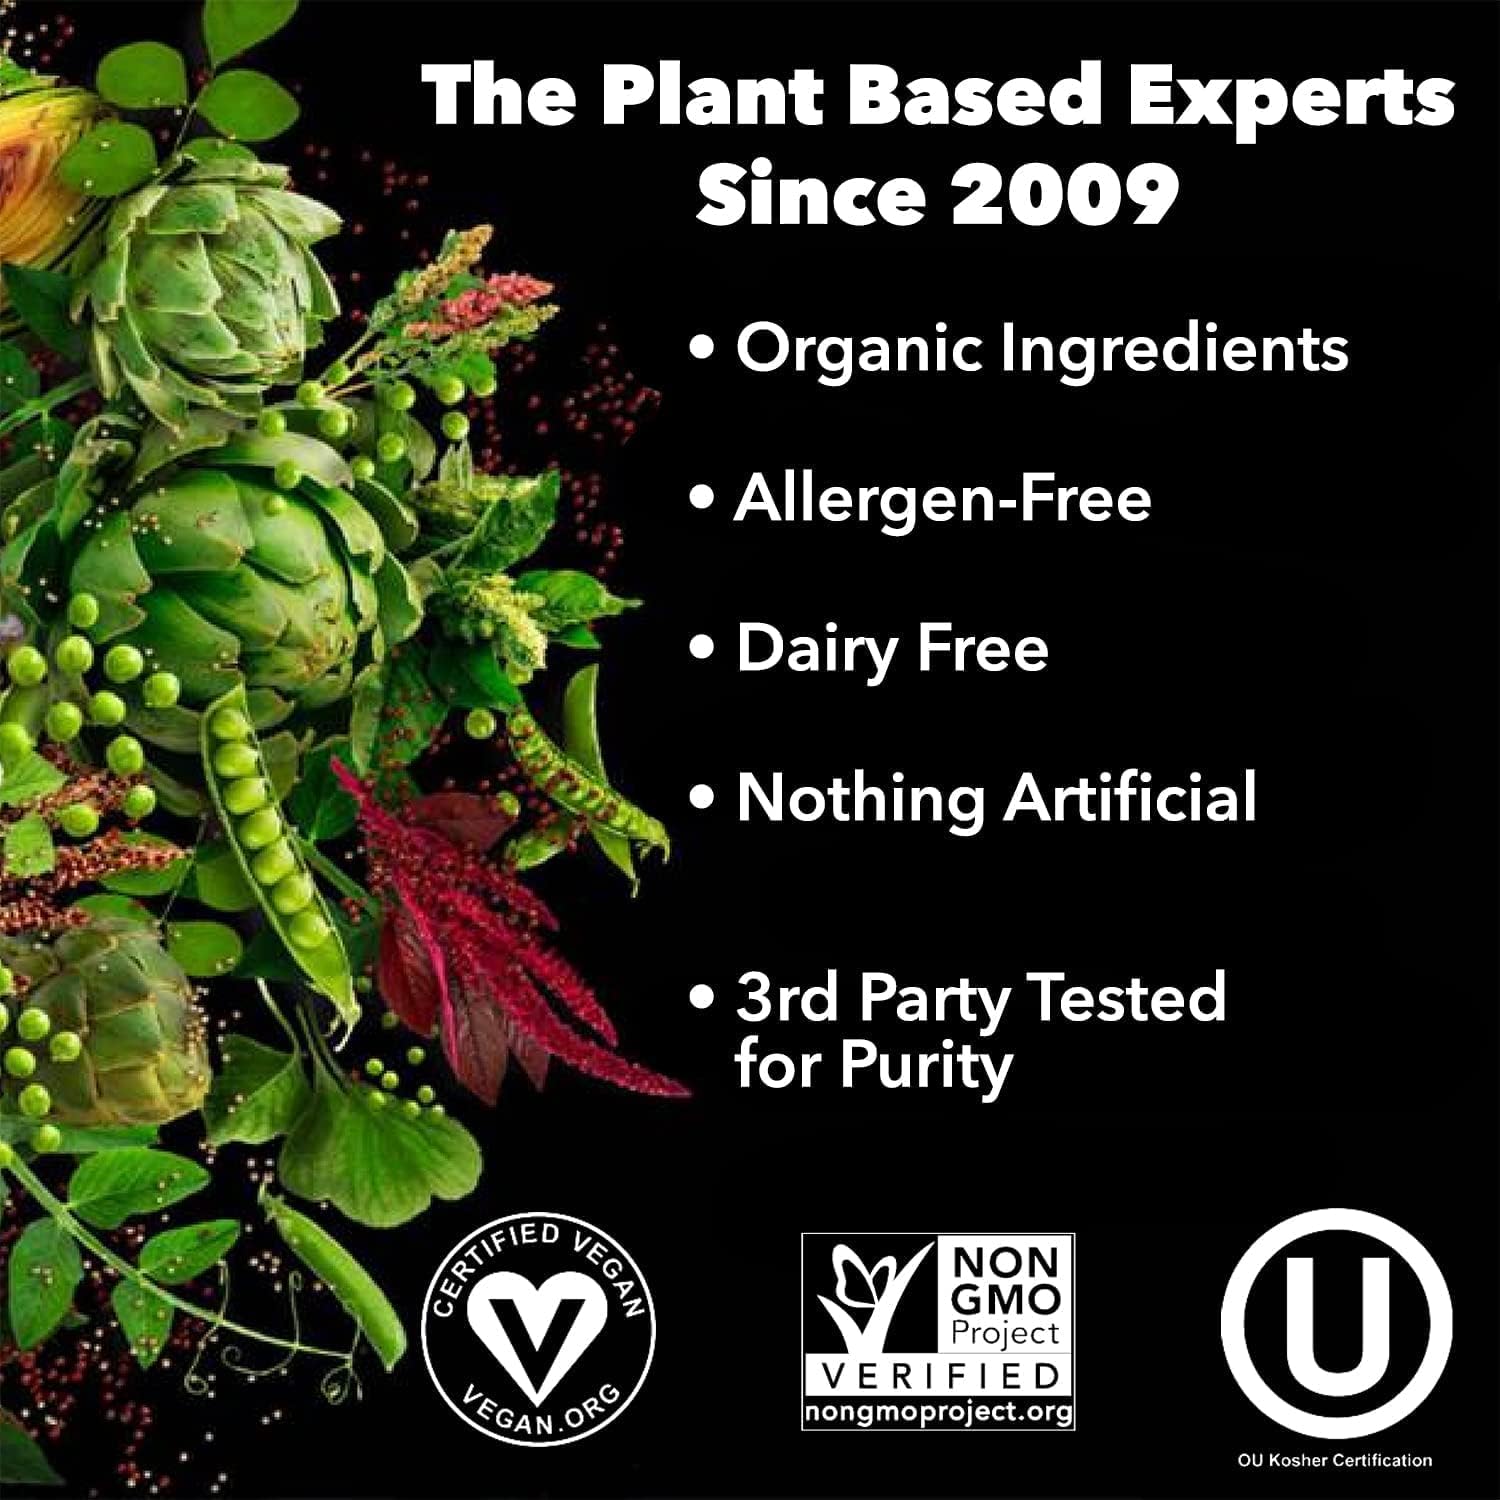 PlantFusion Complete Vegan Protein Powder - Plant Based Protein Powder With BCAAs, Digestive Enzymes and Pea Protein - Keto, Gluten Free, Soy Free, Non-Dairy, No Sugar, Non-GMO - Vanilla Bean 1 lb